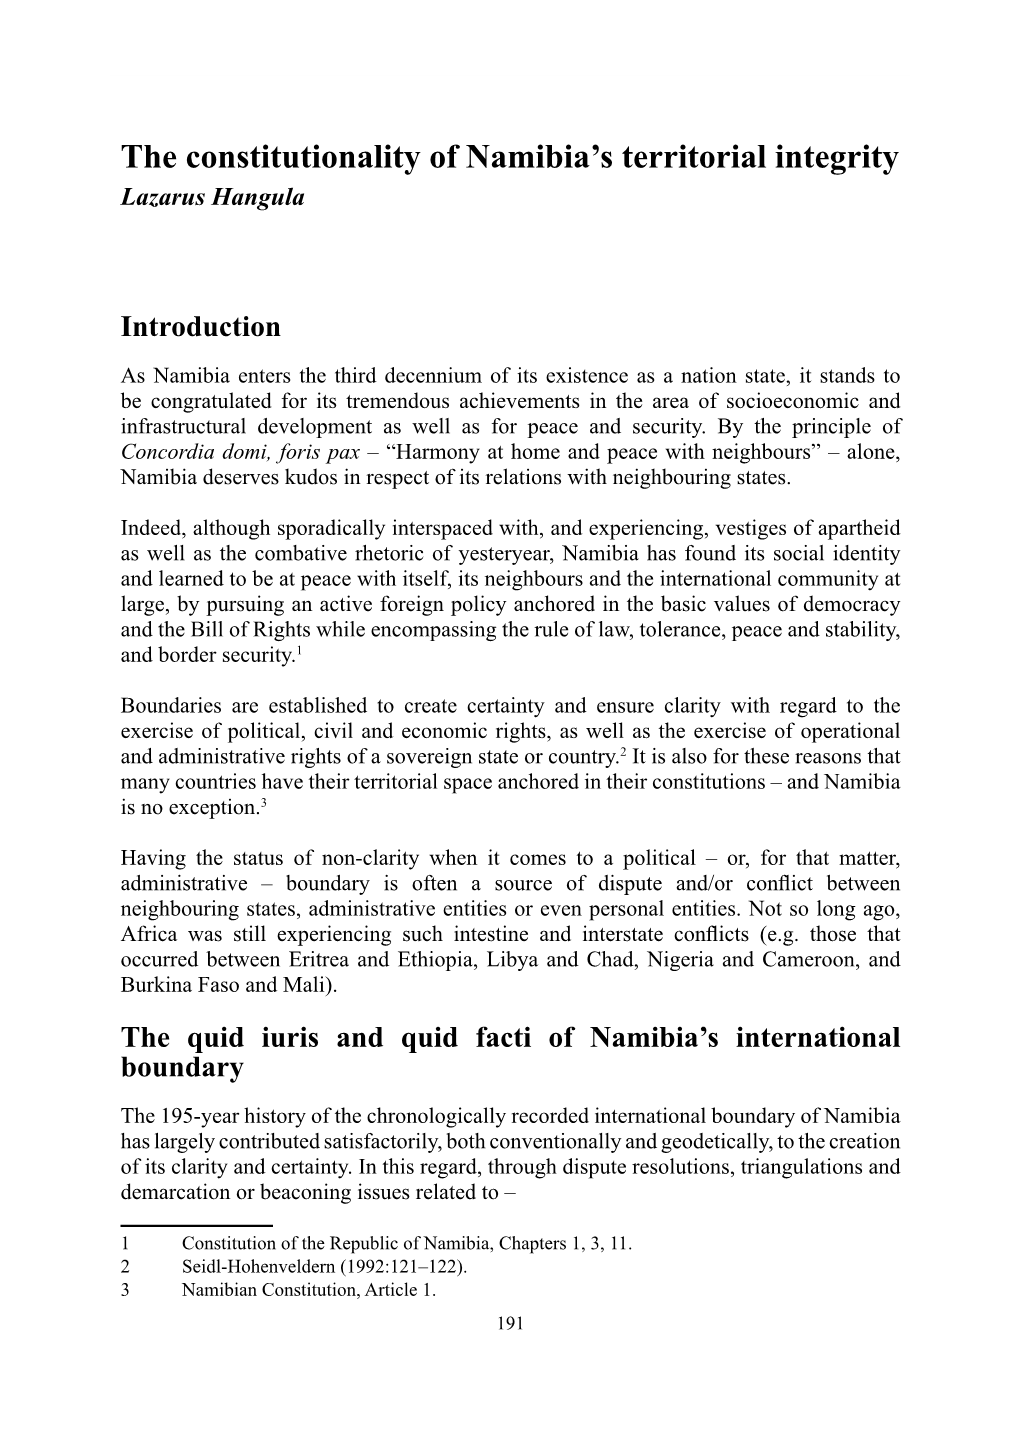 The Constitutionality of Namibia's Territorial Integrity